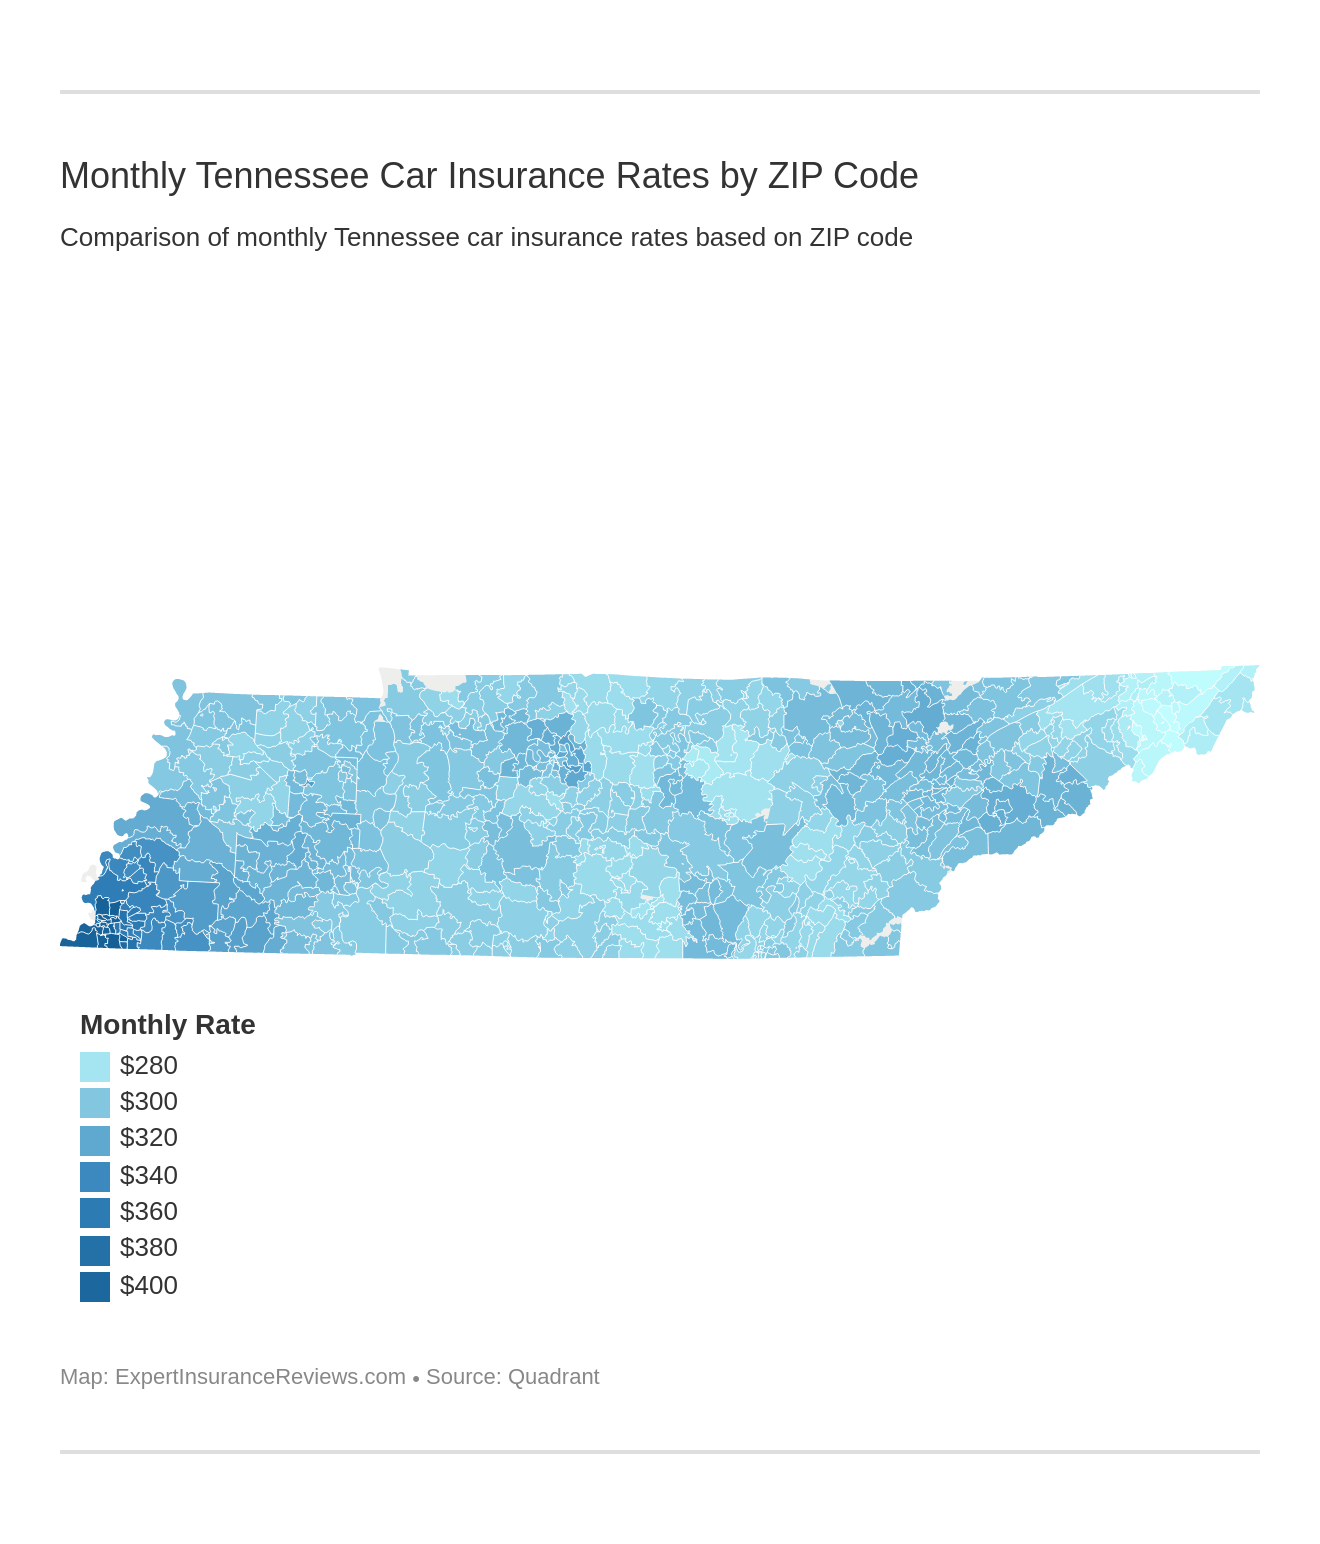 Monthly Tennessee Car Insurance Rates by ZIP Code